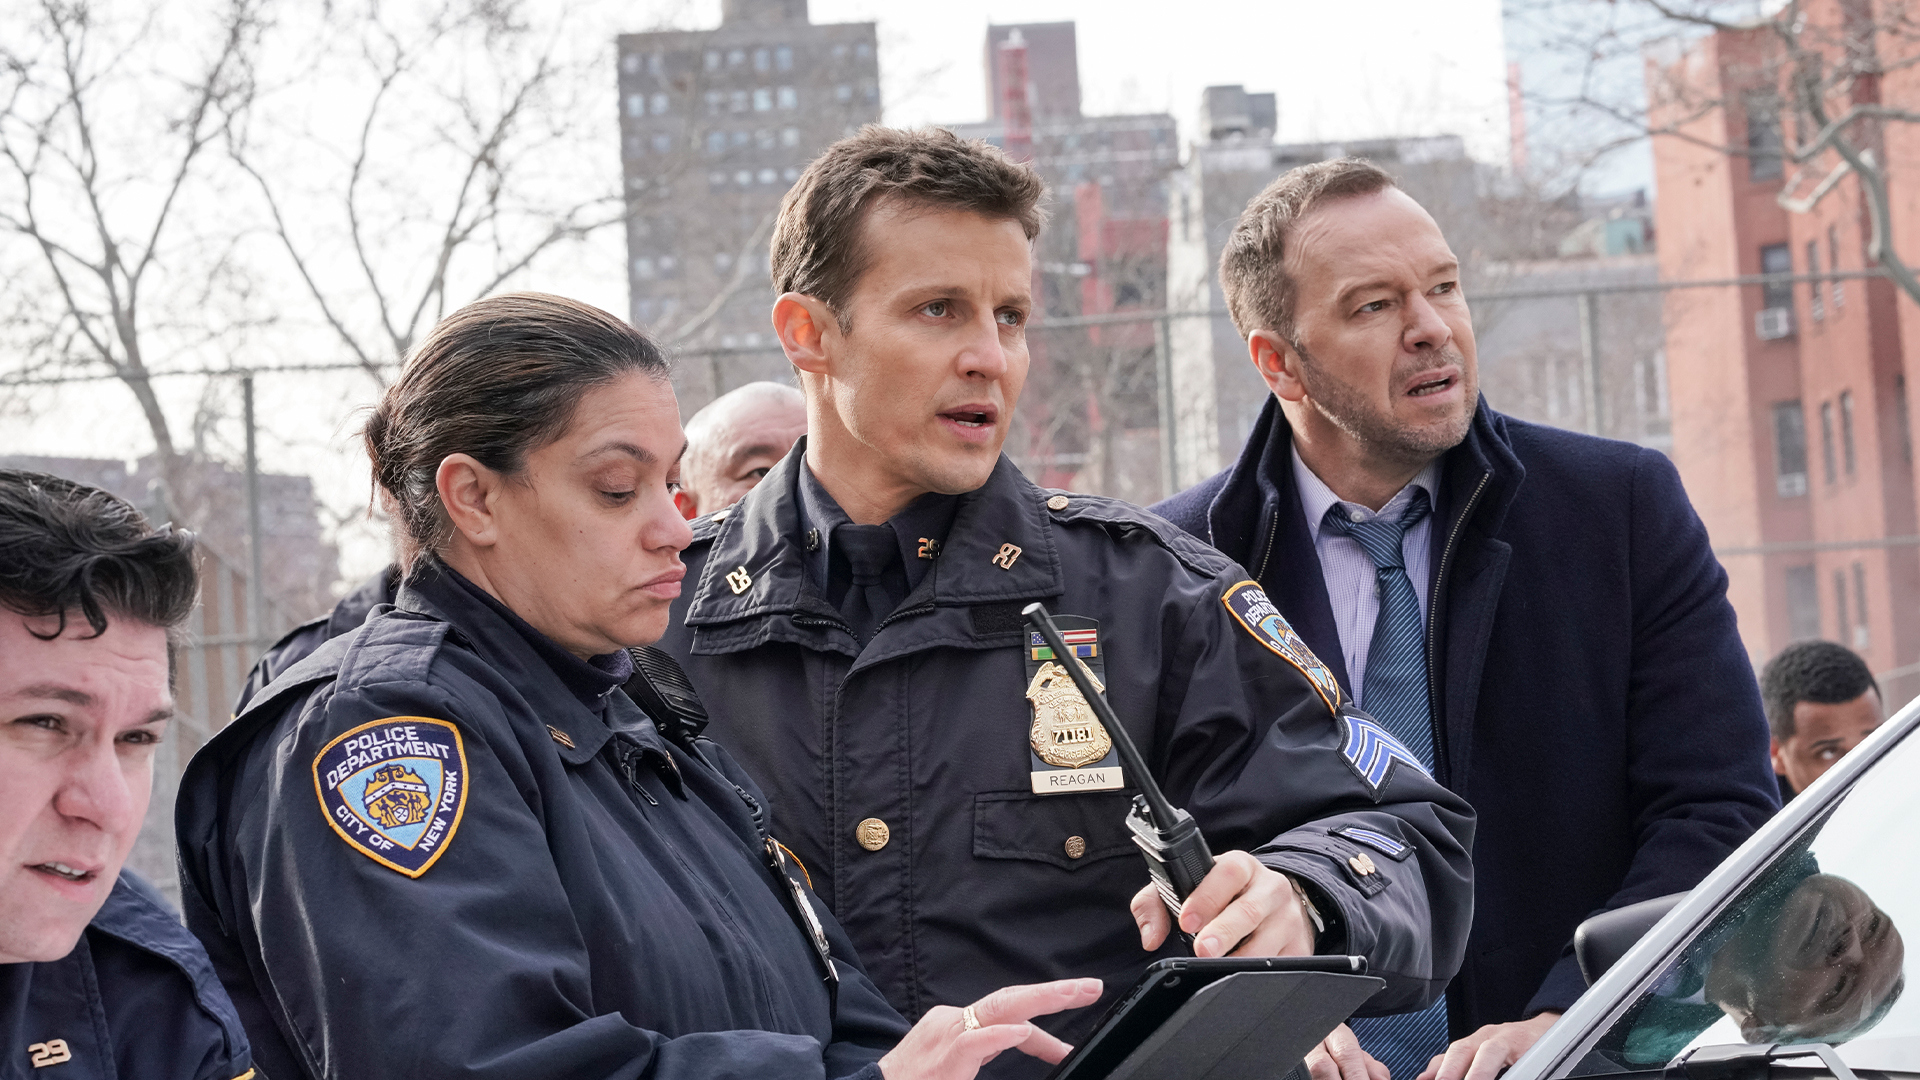 Blue Bloods Season 9 Episode 14 - My Brother's Keeper